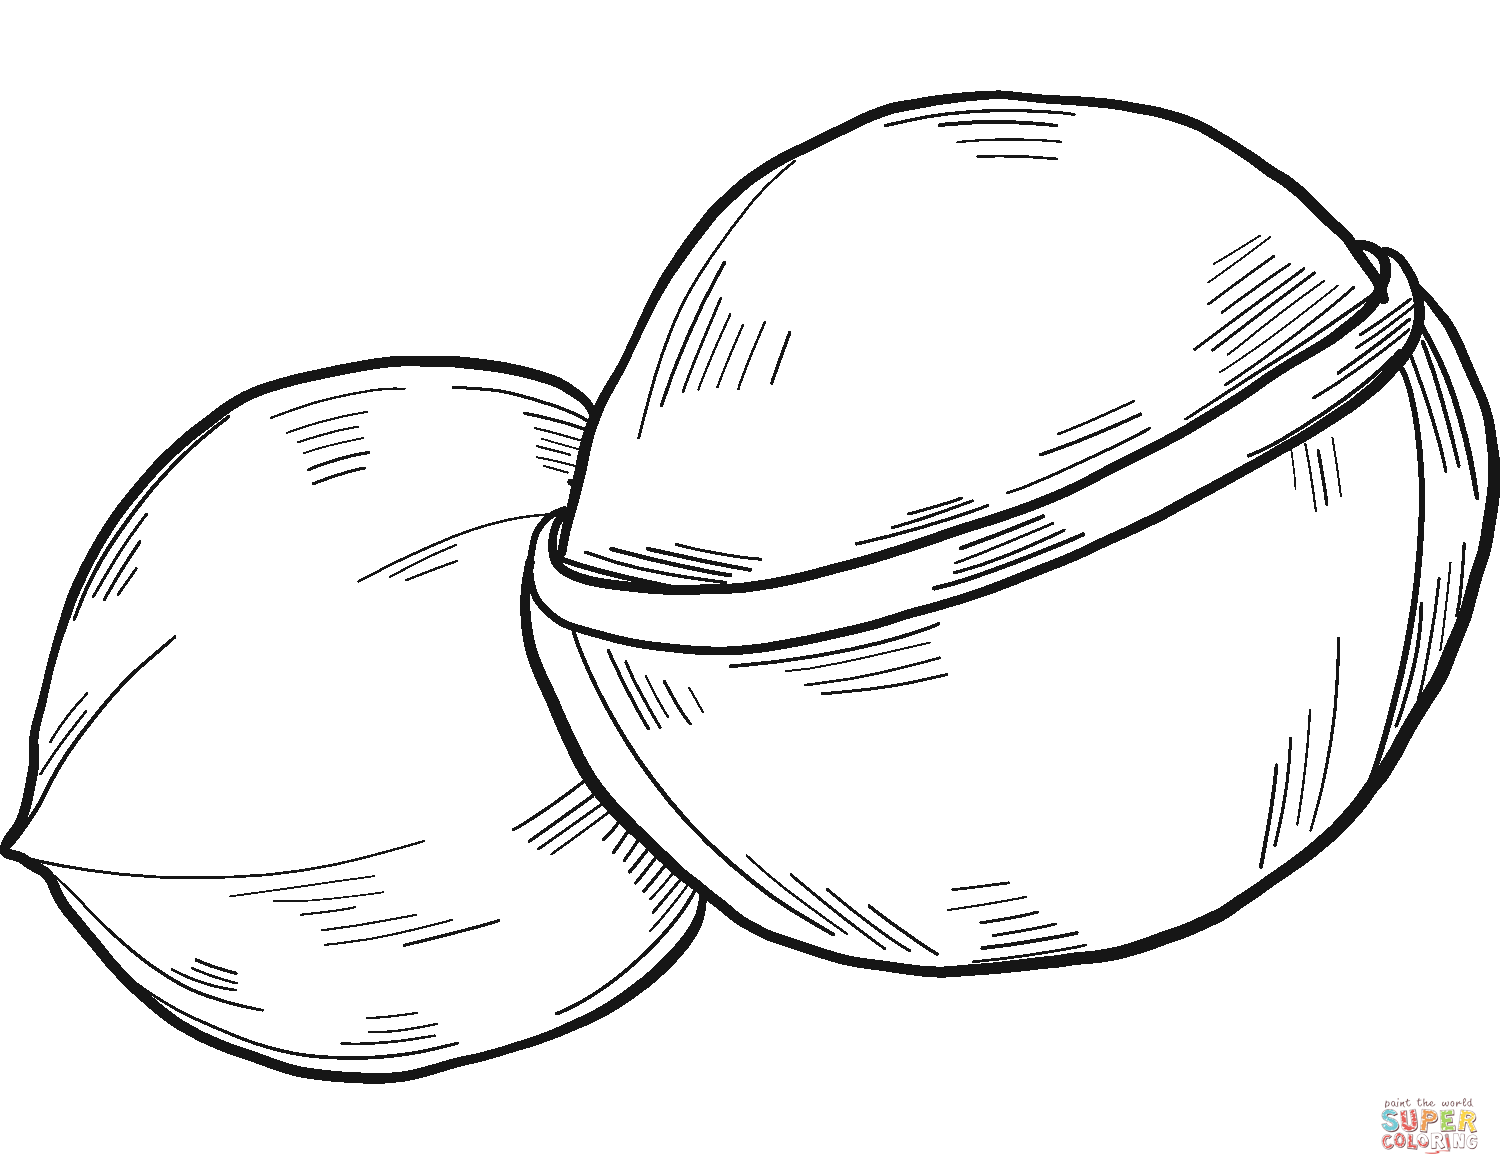 Macadamia Nut coloring page | Free Printable Coloring Pages